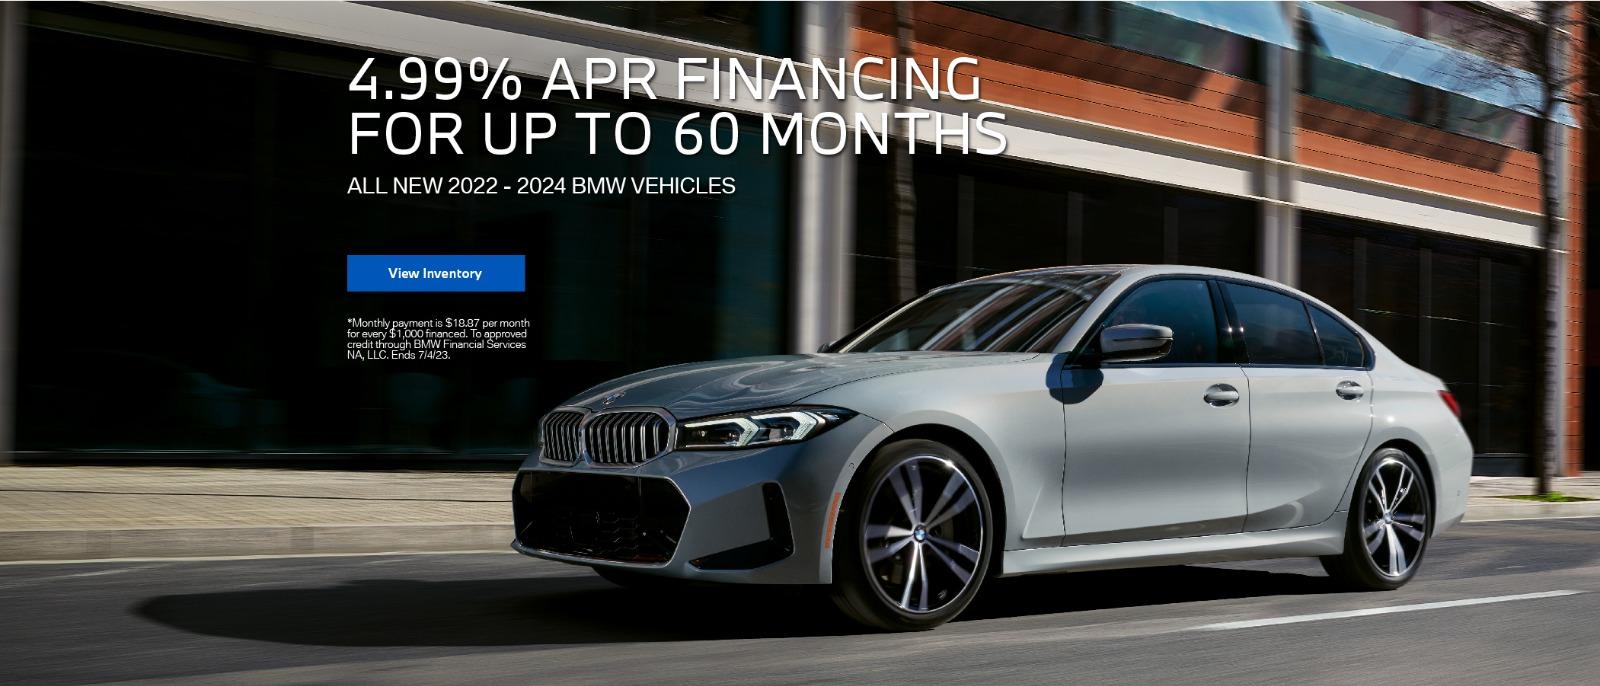 Full Line Up 4.99% APR Financing for up to 60 months